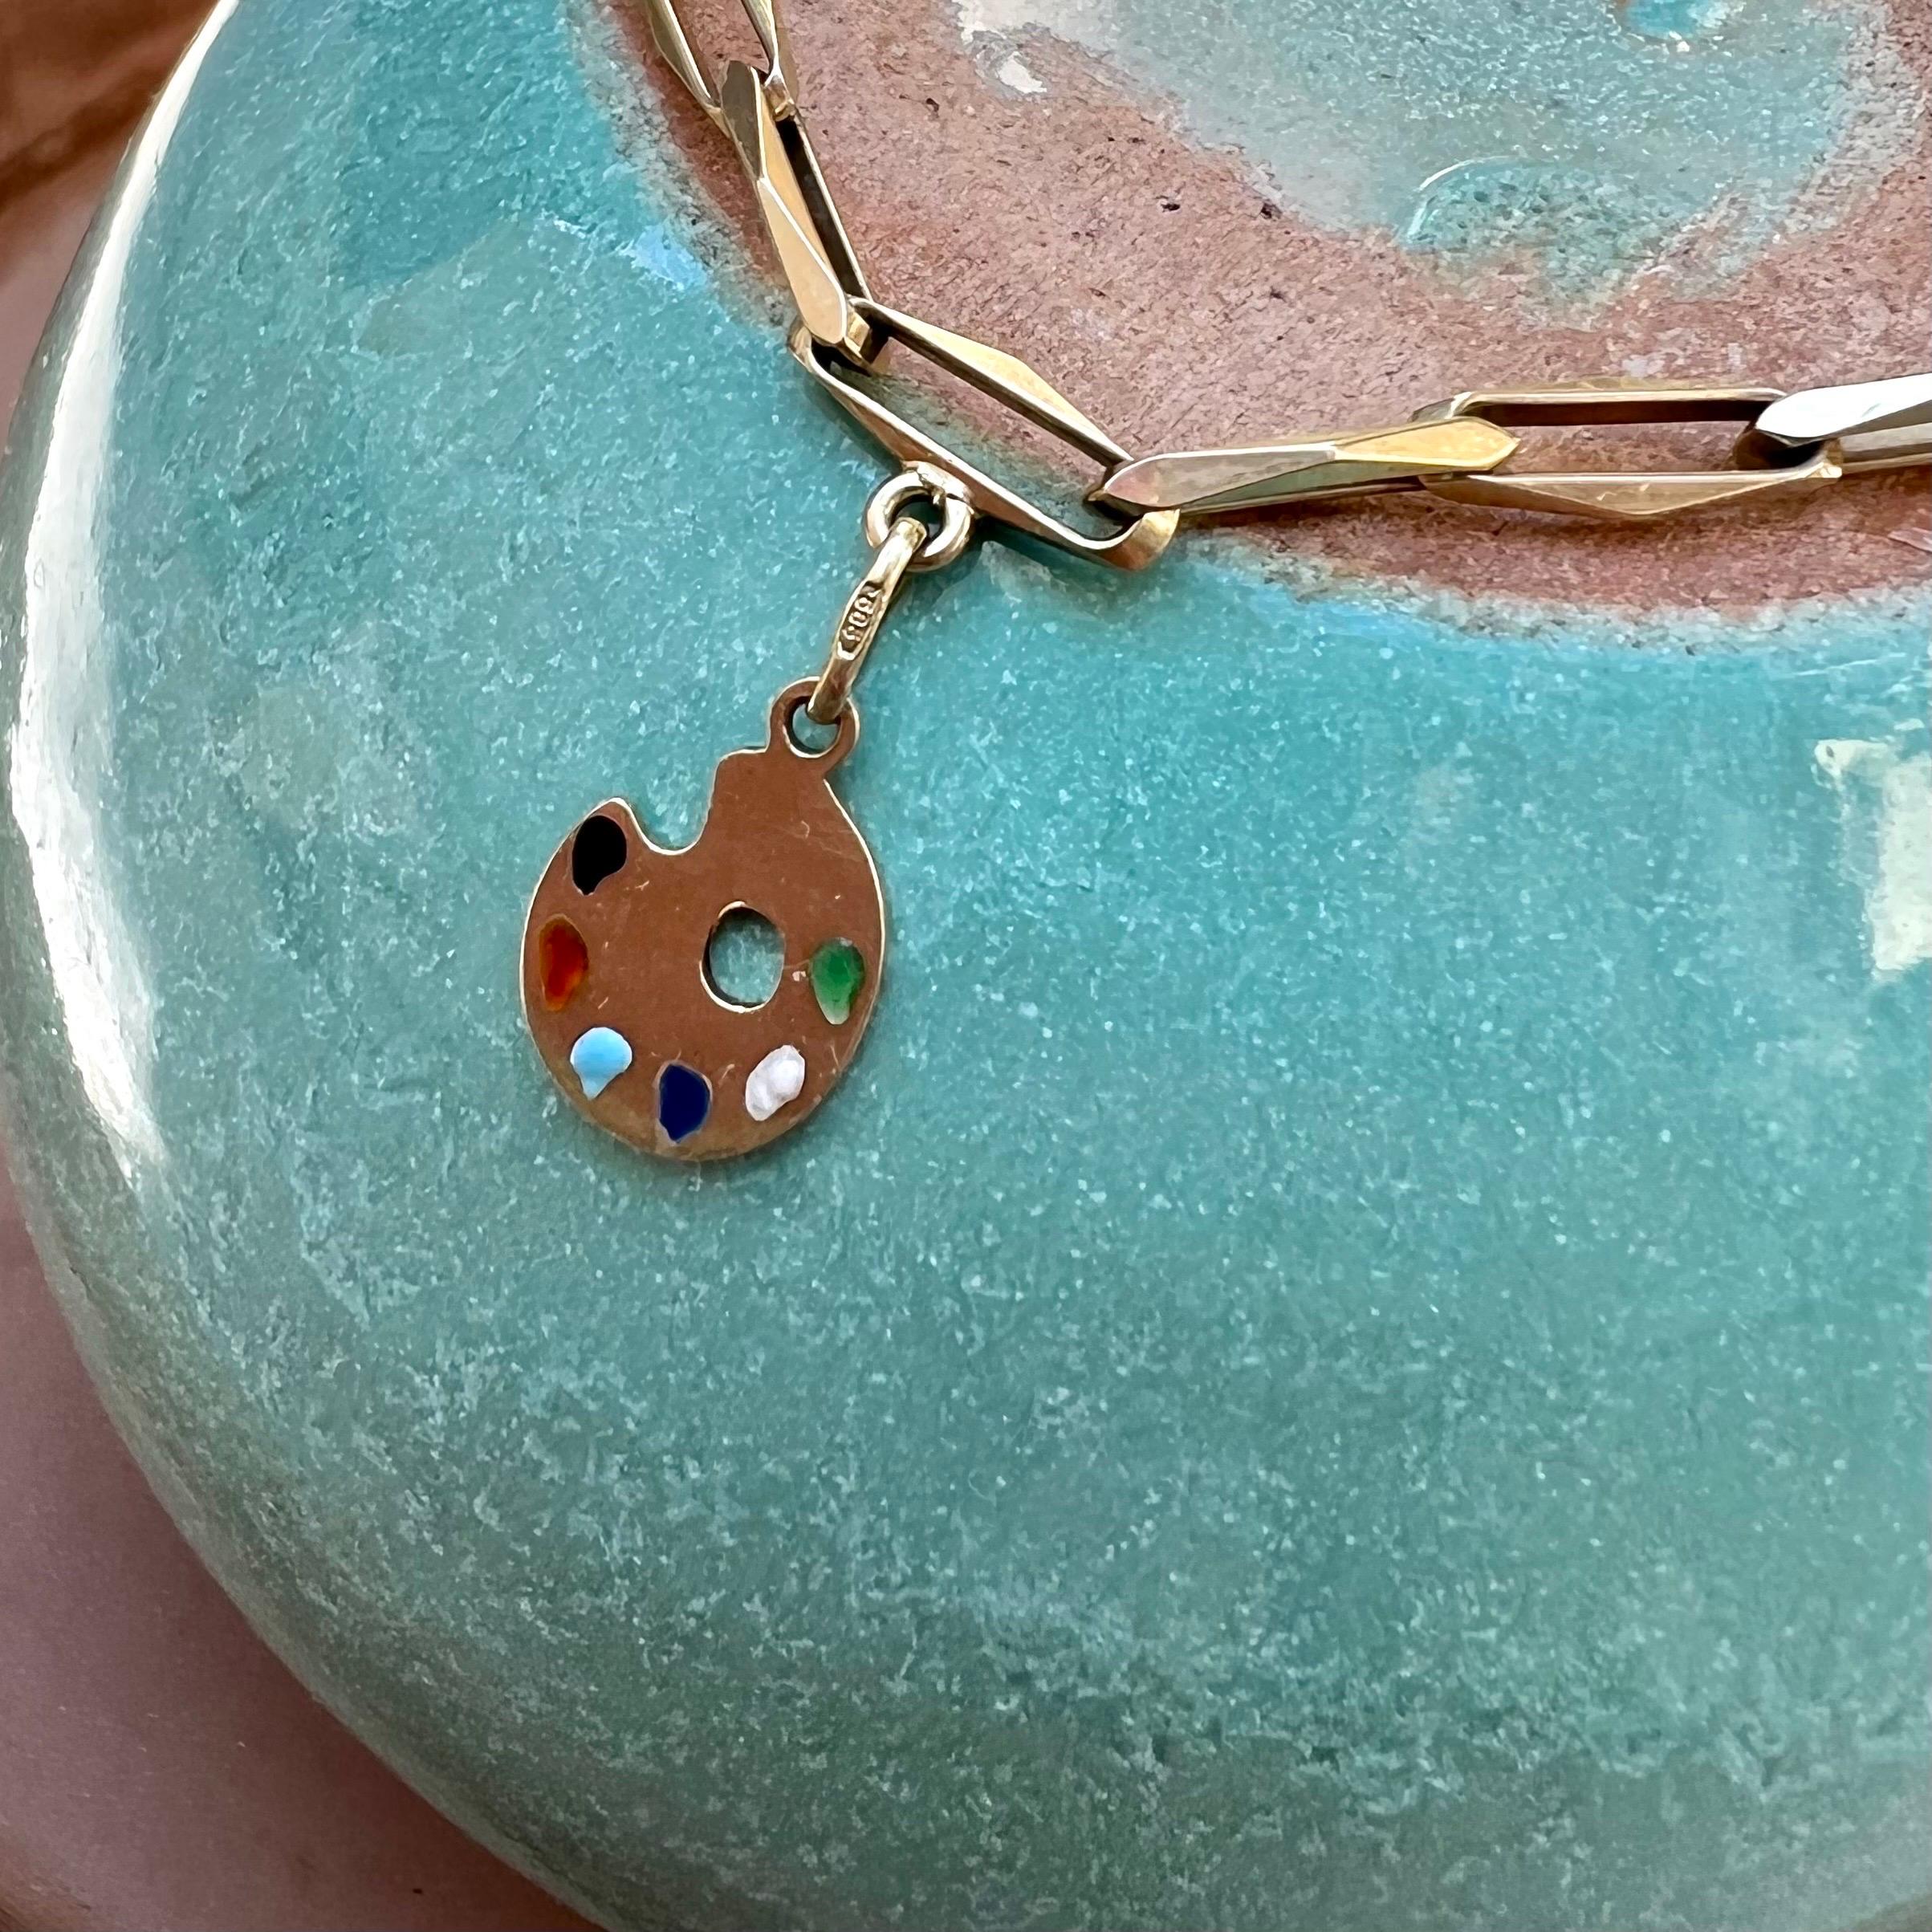 A preloved painters palette charm pendant smeared with different colors of paint on the palette. The charm is beautifully stylized and crafted in 14 karat gold. Charms are great to collect as wearable memories, it has a symbolic and often a